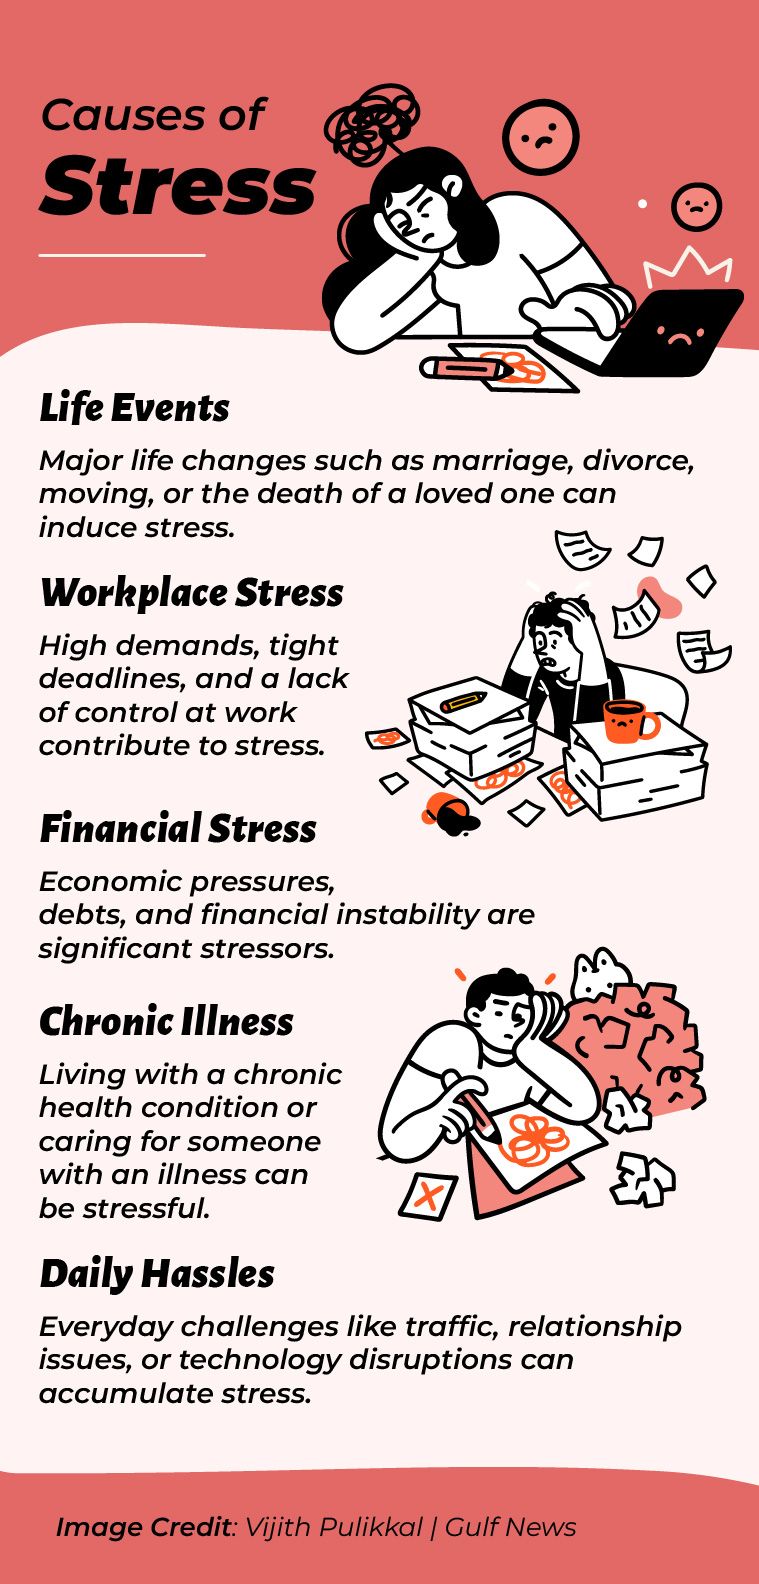 Causes of stress